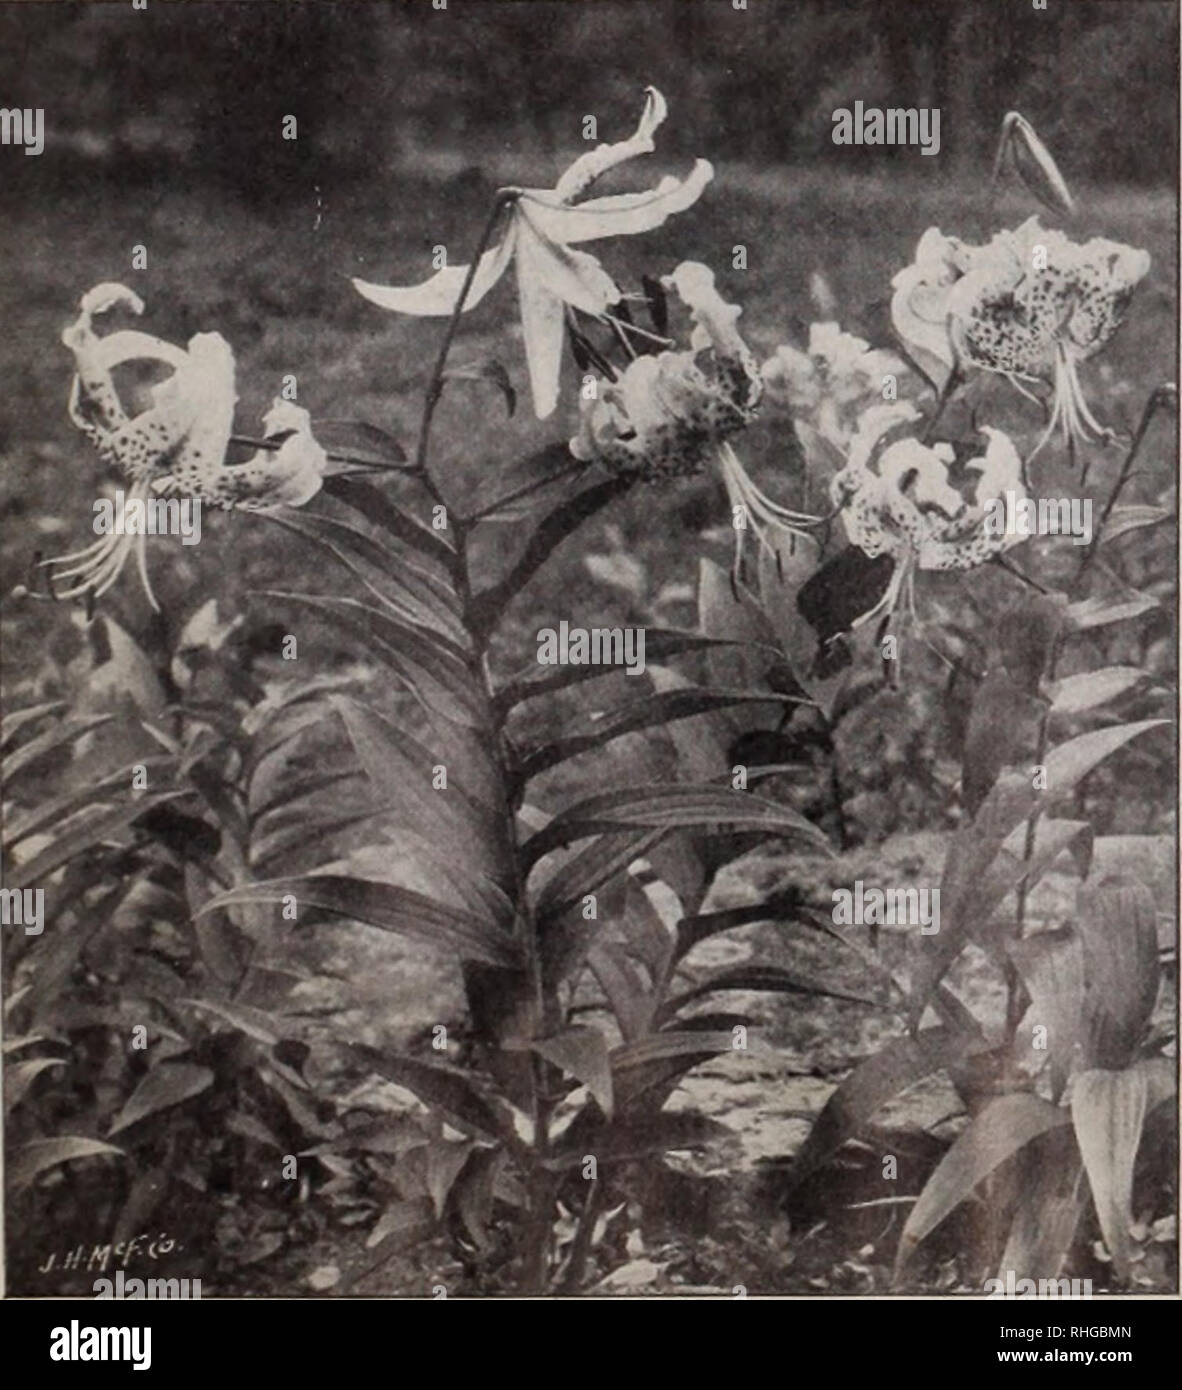 . Boddington's quality bulbs, seeds and plants / Arthur T. Boddington.. Nursery Catalogue. Lilium speciosum (type) Lilium auratum (type) LILIUM AURATUM PICTUM. A very choice Each Doz. 100 type of Lilium auratum ; pure white, with red and yellow bands through each petal. Large bulbs ...|o 30 $3 00 S20 00 LILIUM AURATUM PLATYPHYLLUM. A very strong and vigorous type of L. atiratum. Flowers of immense size, pure ivory-white, with a deep golden band through each petal. Mammoth bulbs 50 4 00 30 00 Large bulbs 40 3 50 25 00 LILIUM AURATUM RUBRUM VITTATUM. A unique variety; flowers 10 to 12 inches acr Stock Photo